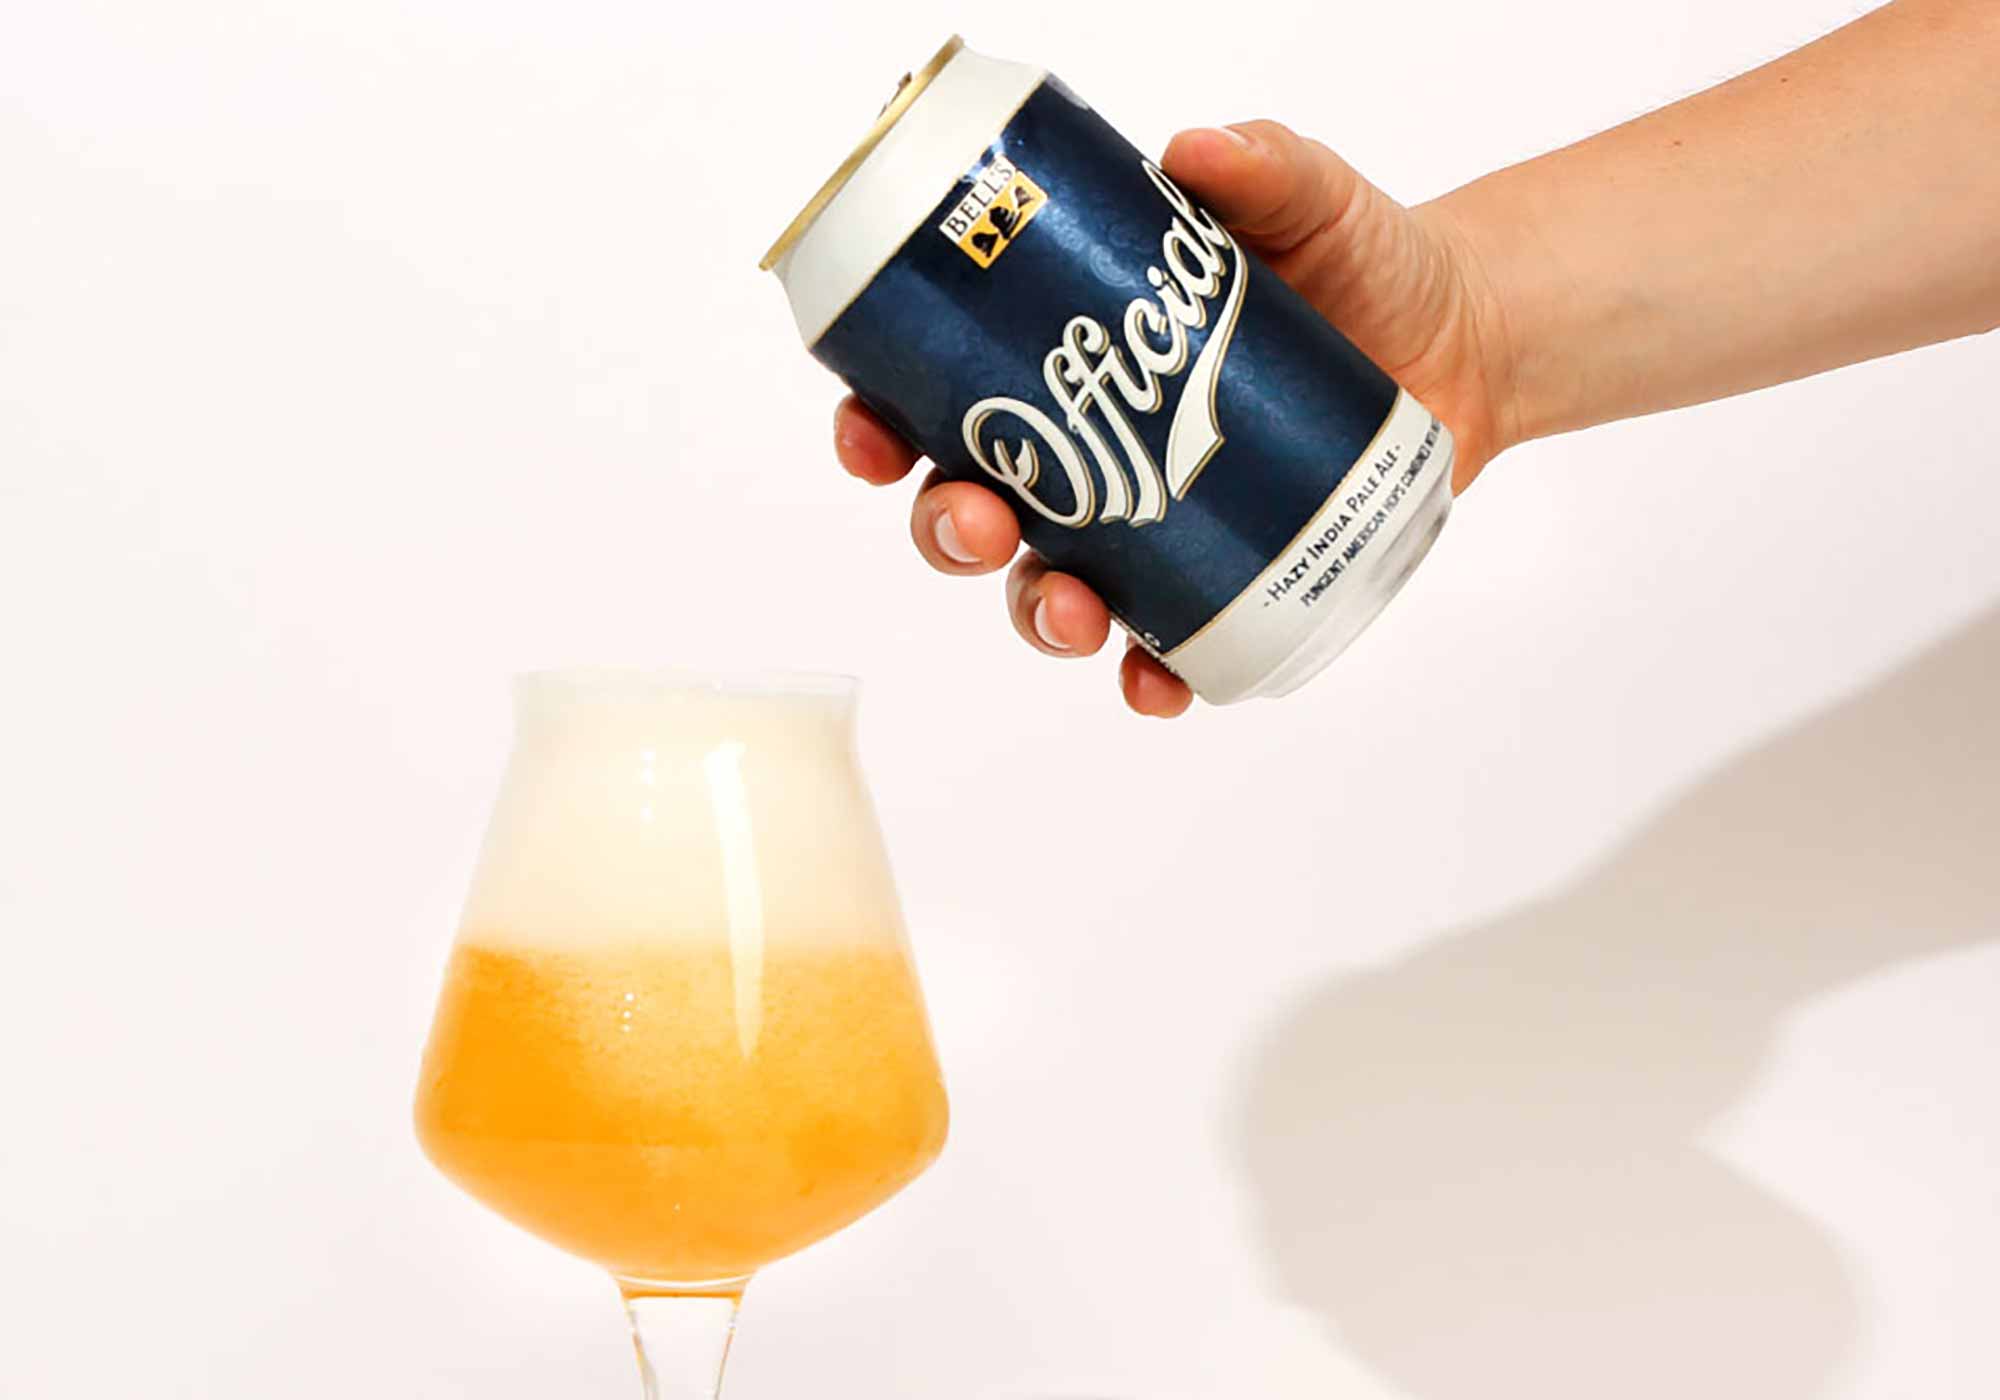 The One ‘Official’ Hazy IPA You Should Be Drinking